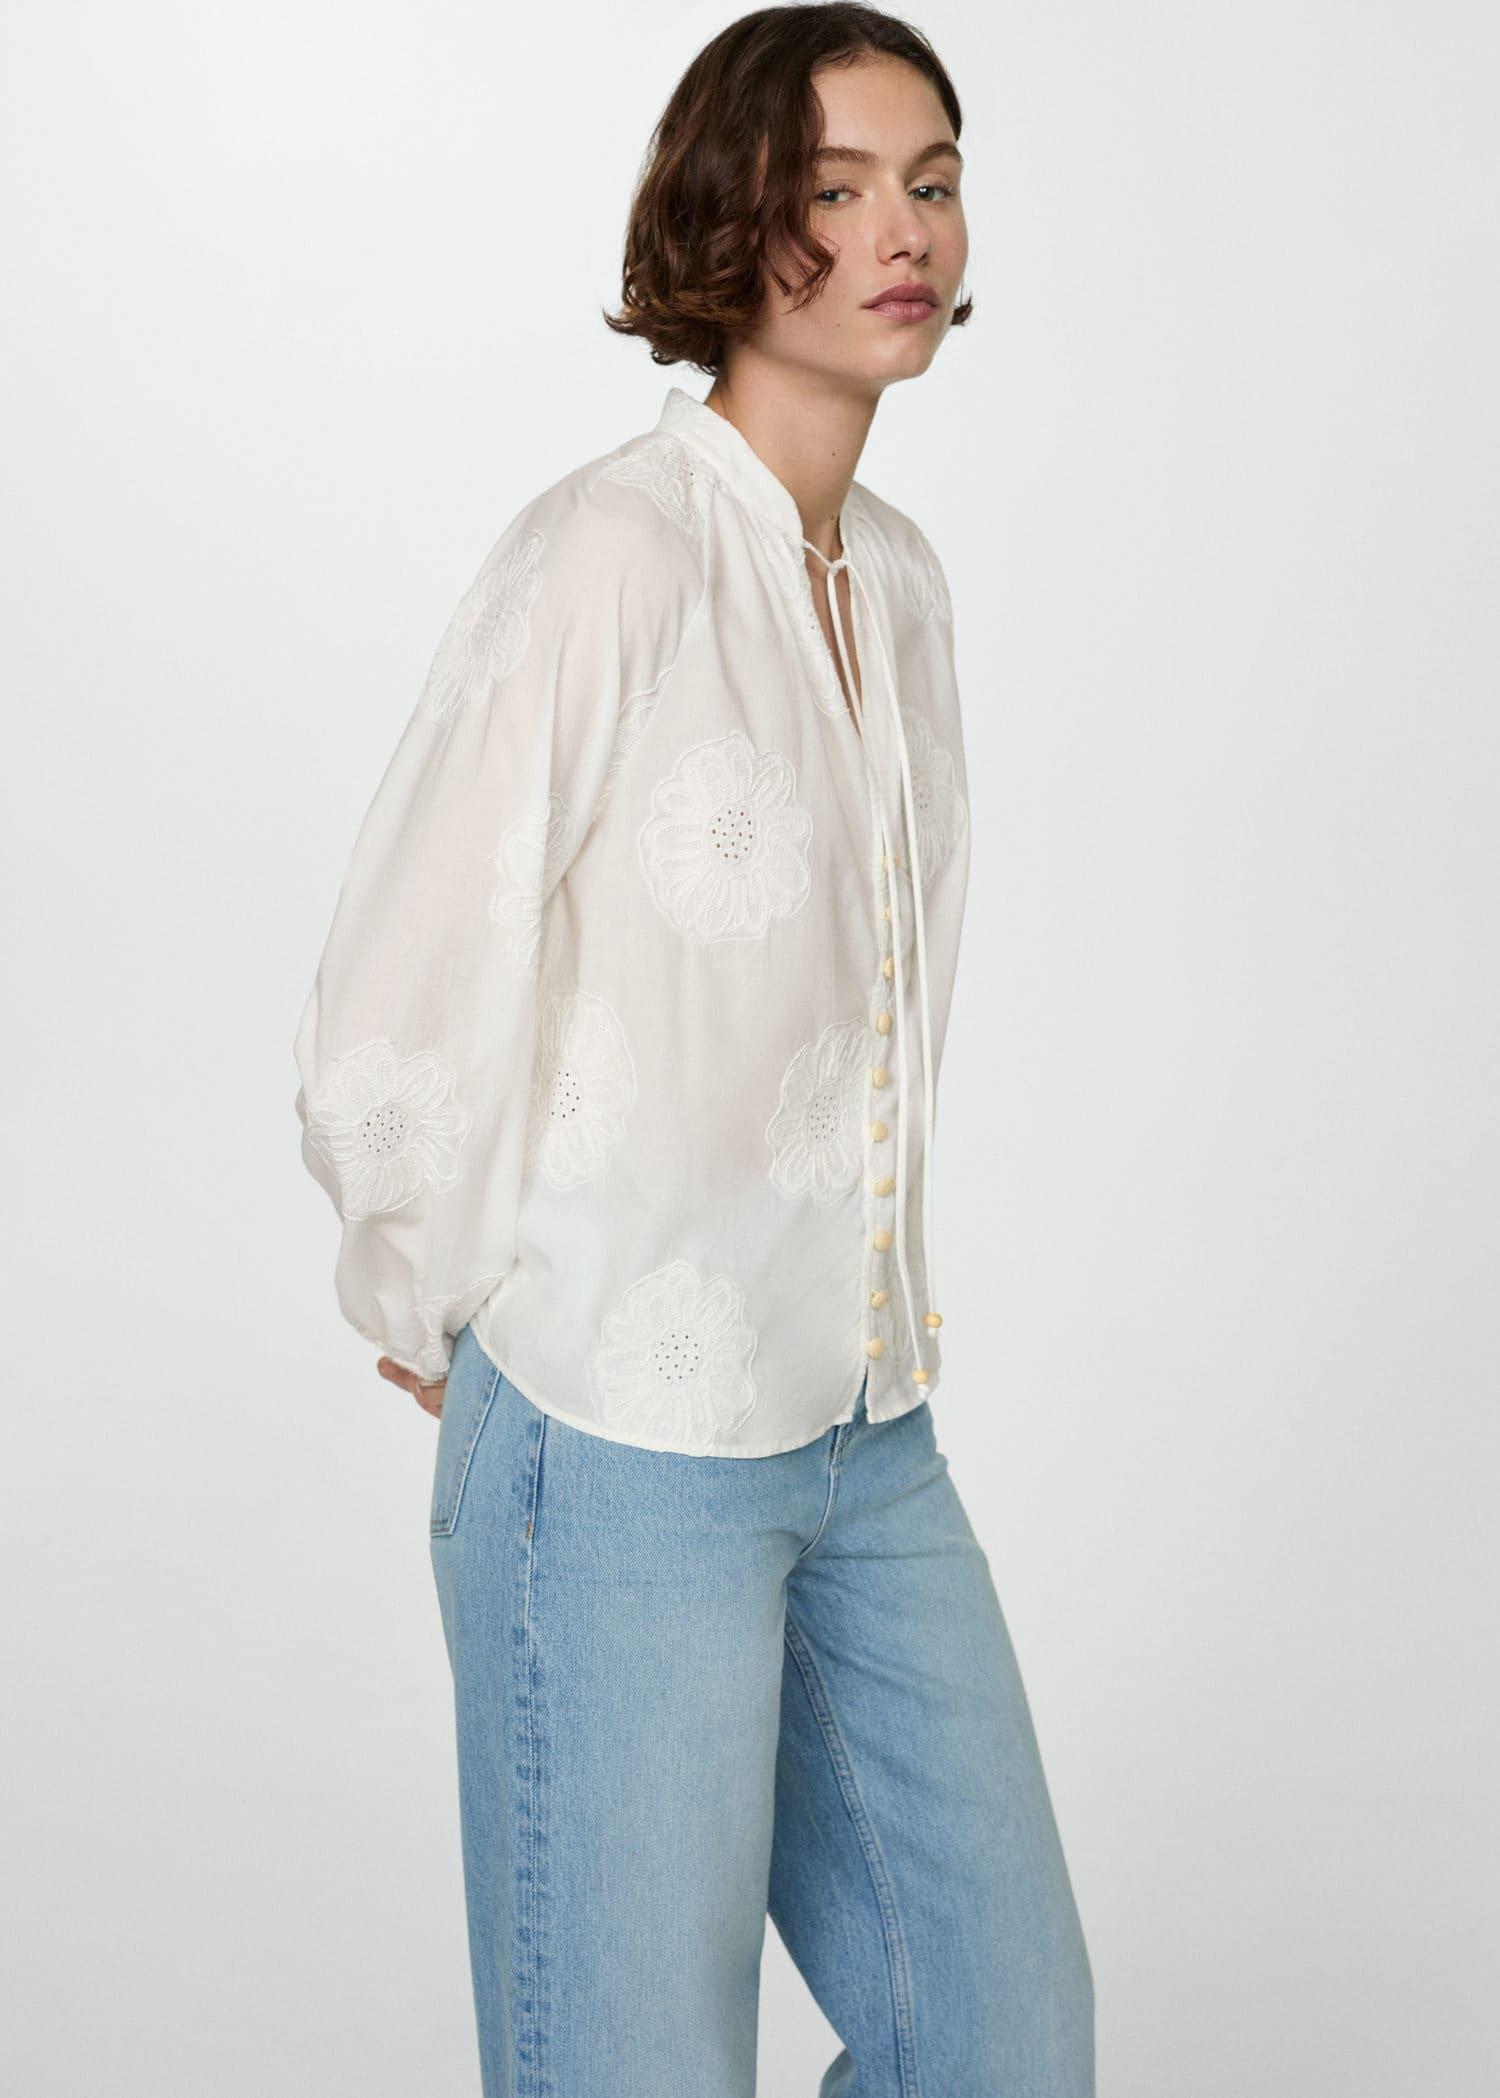 Mango - White Floral Embroidered Blouse With Bow